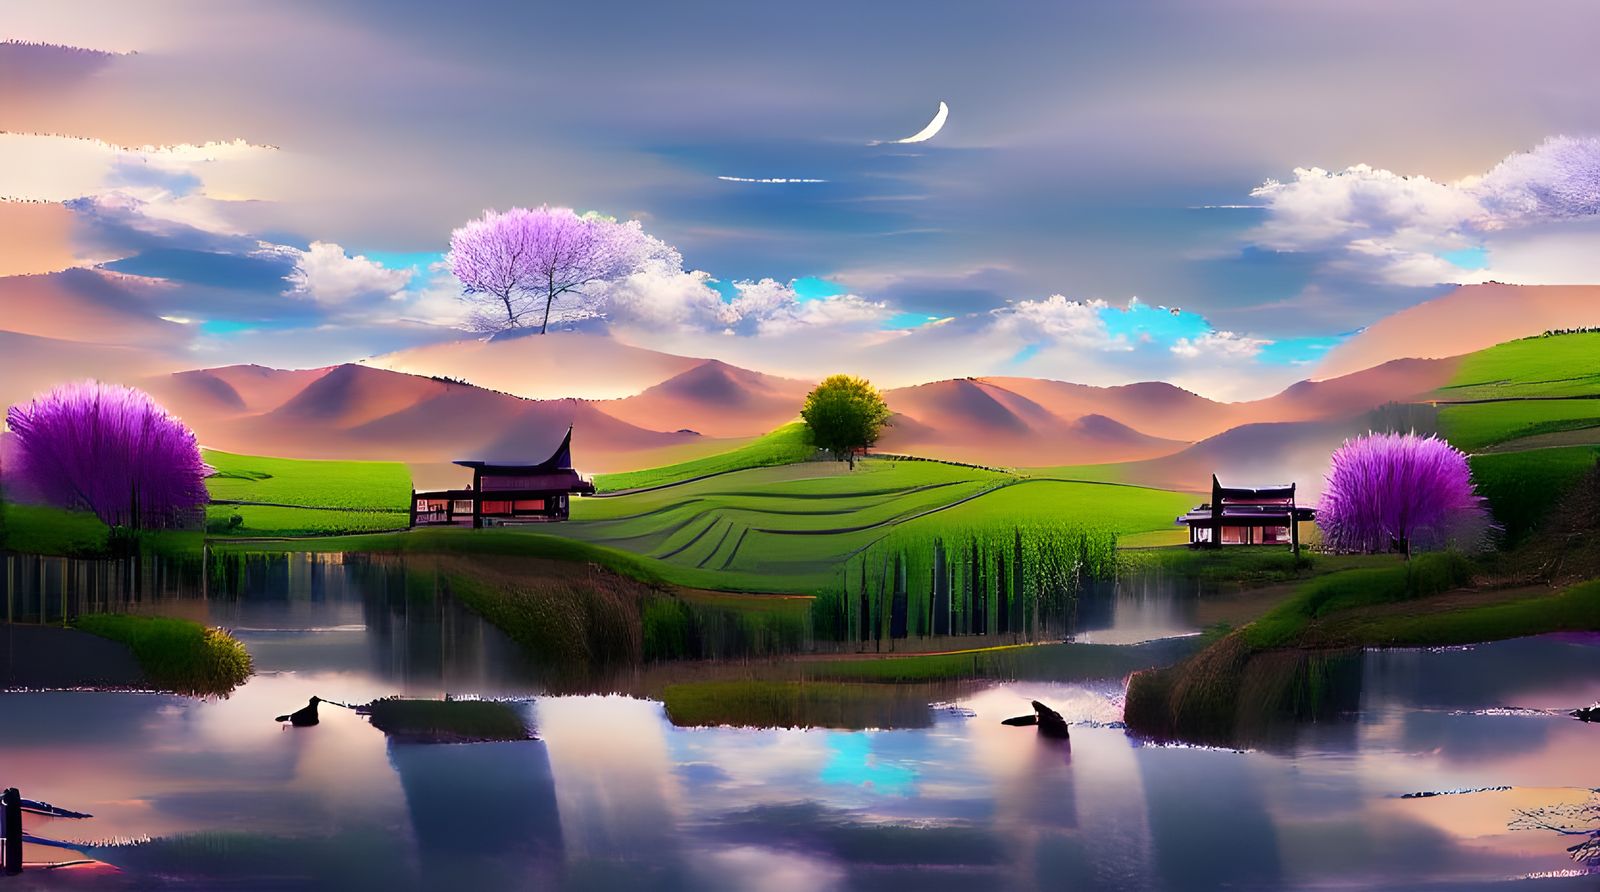 Relaxing place to meditate